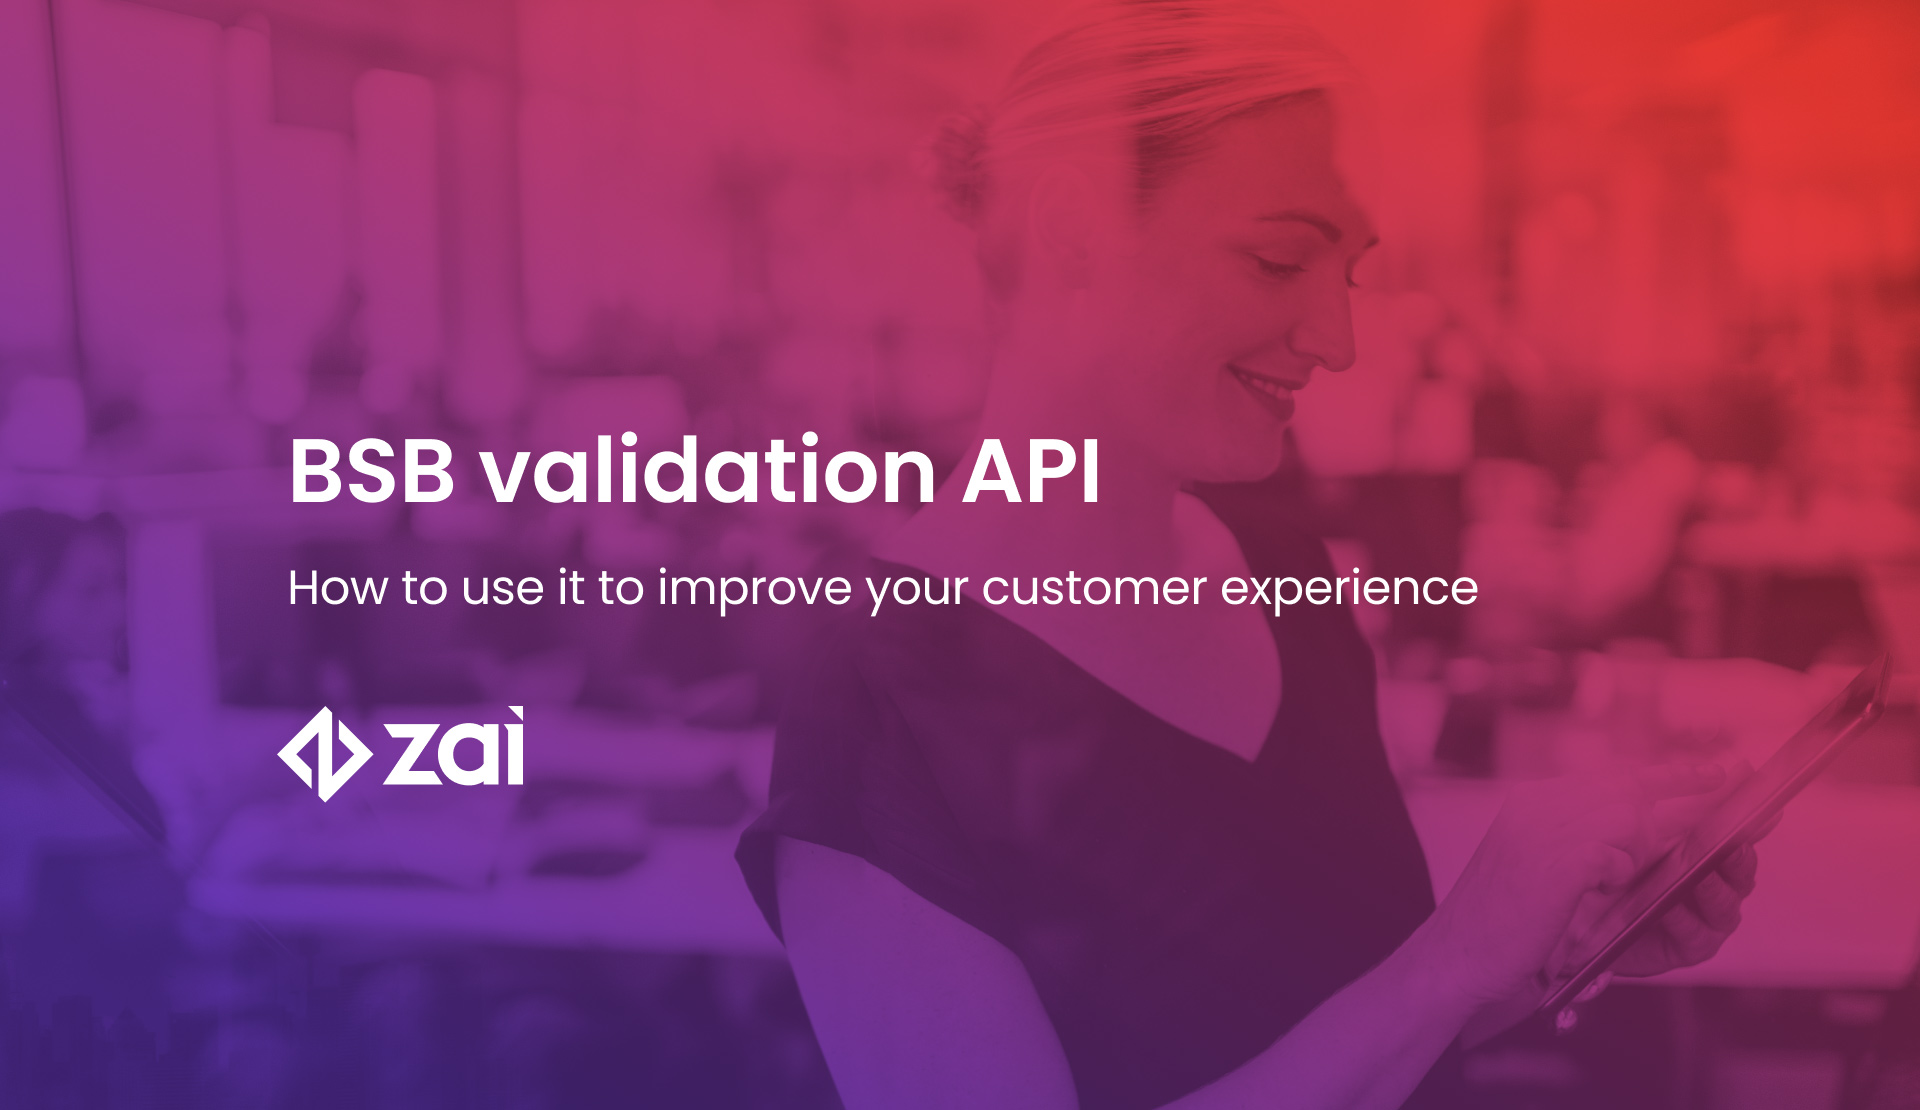 BSB validation API: How to use it to improve customer experience